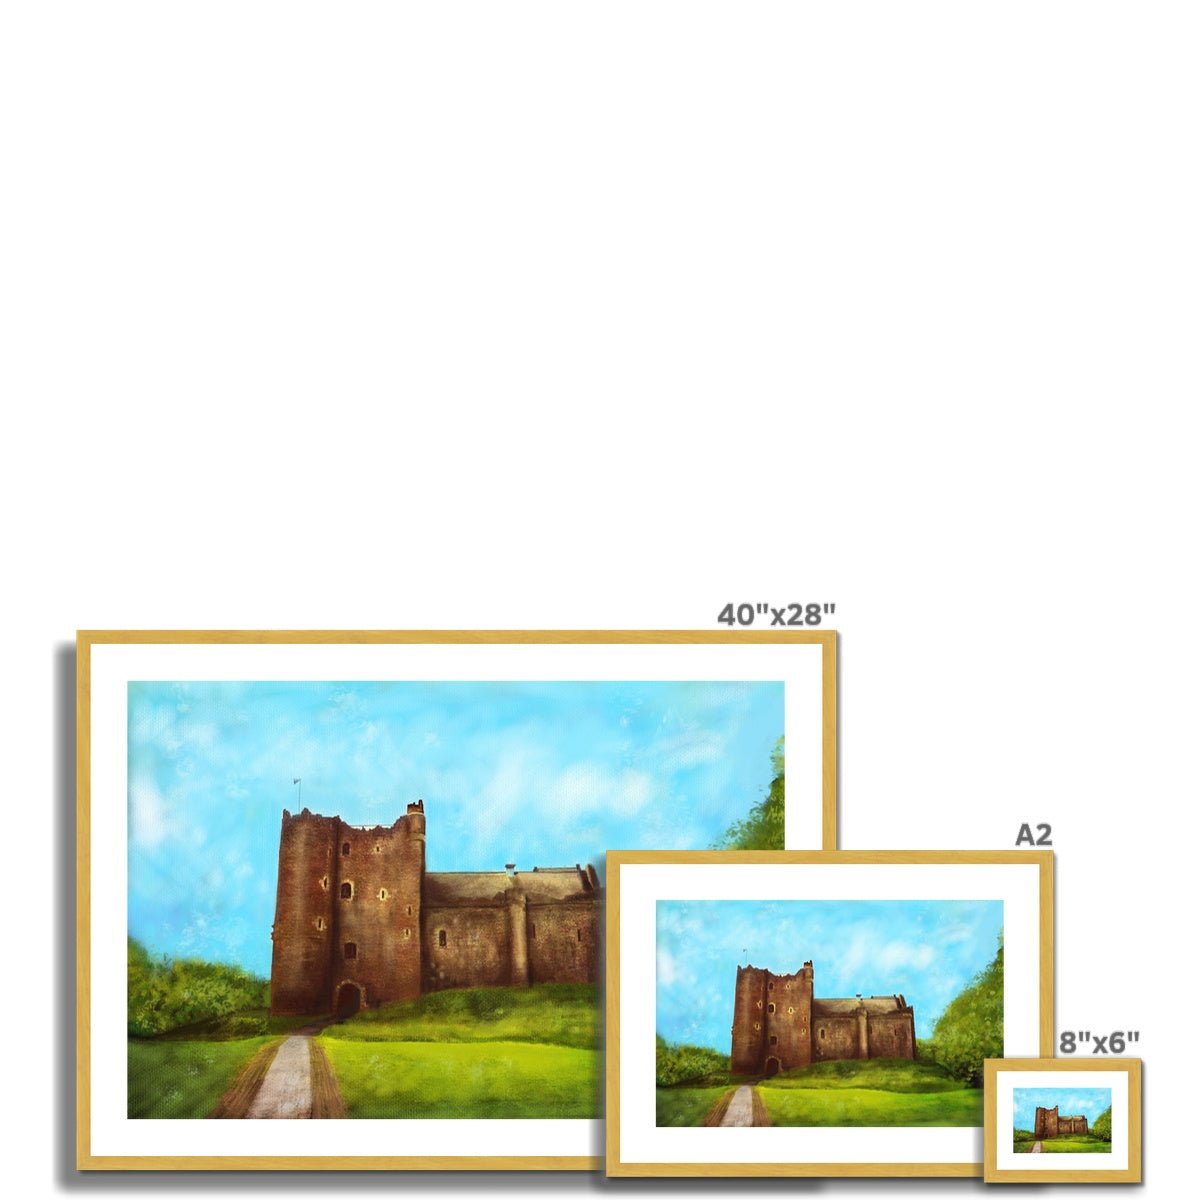 Doune Castle Painting | Antique Framed & Mounted Prints From Scotland-Antique Framed & Mounted Prints-Historic & Iconic Scotland Art Gallery-Paintings, Prints, Homeware, Art Gifts From Scotland By Scottish Artist Kevin Hunter